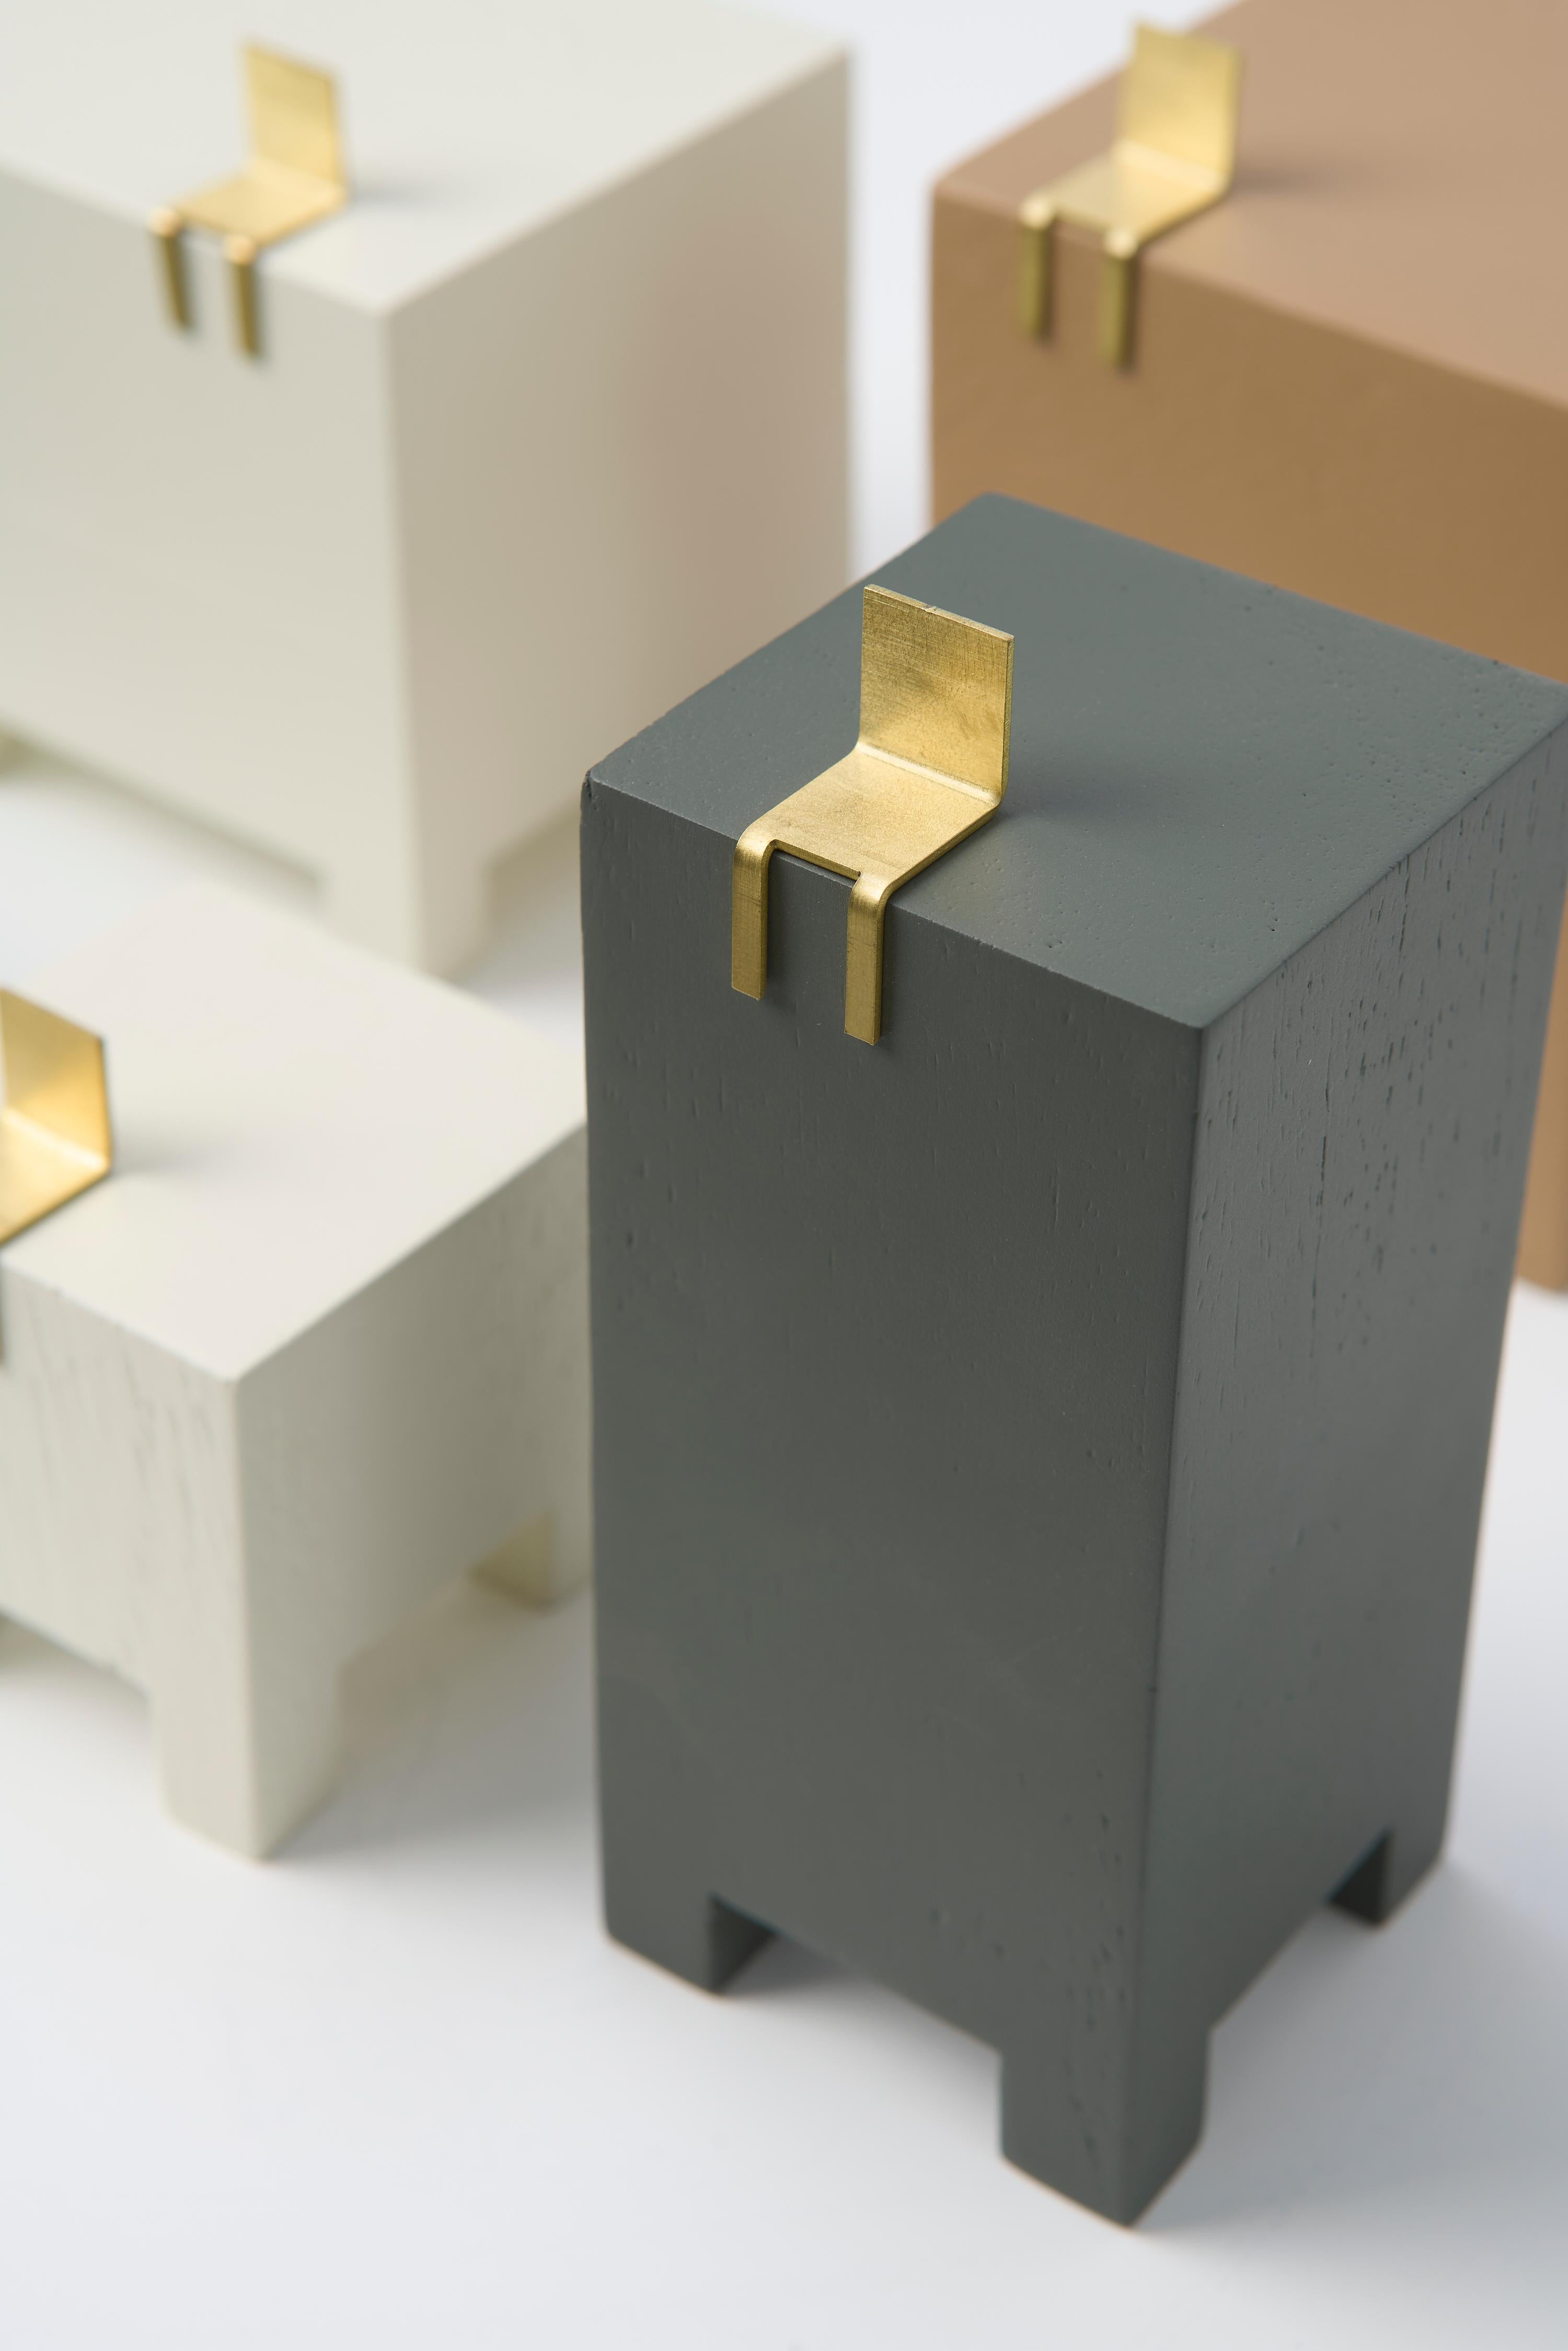 Minimalist Cadeira Series, Wood and Brass Sculptures For Sale